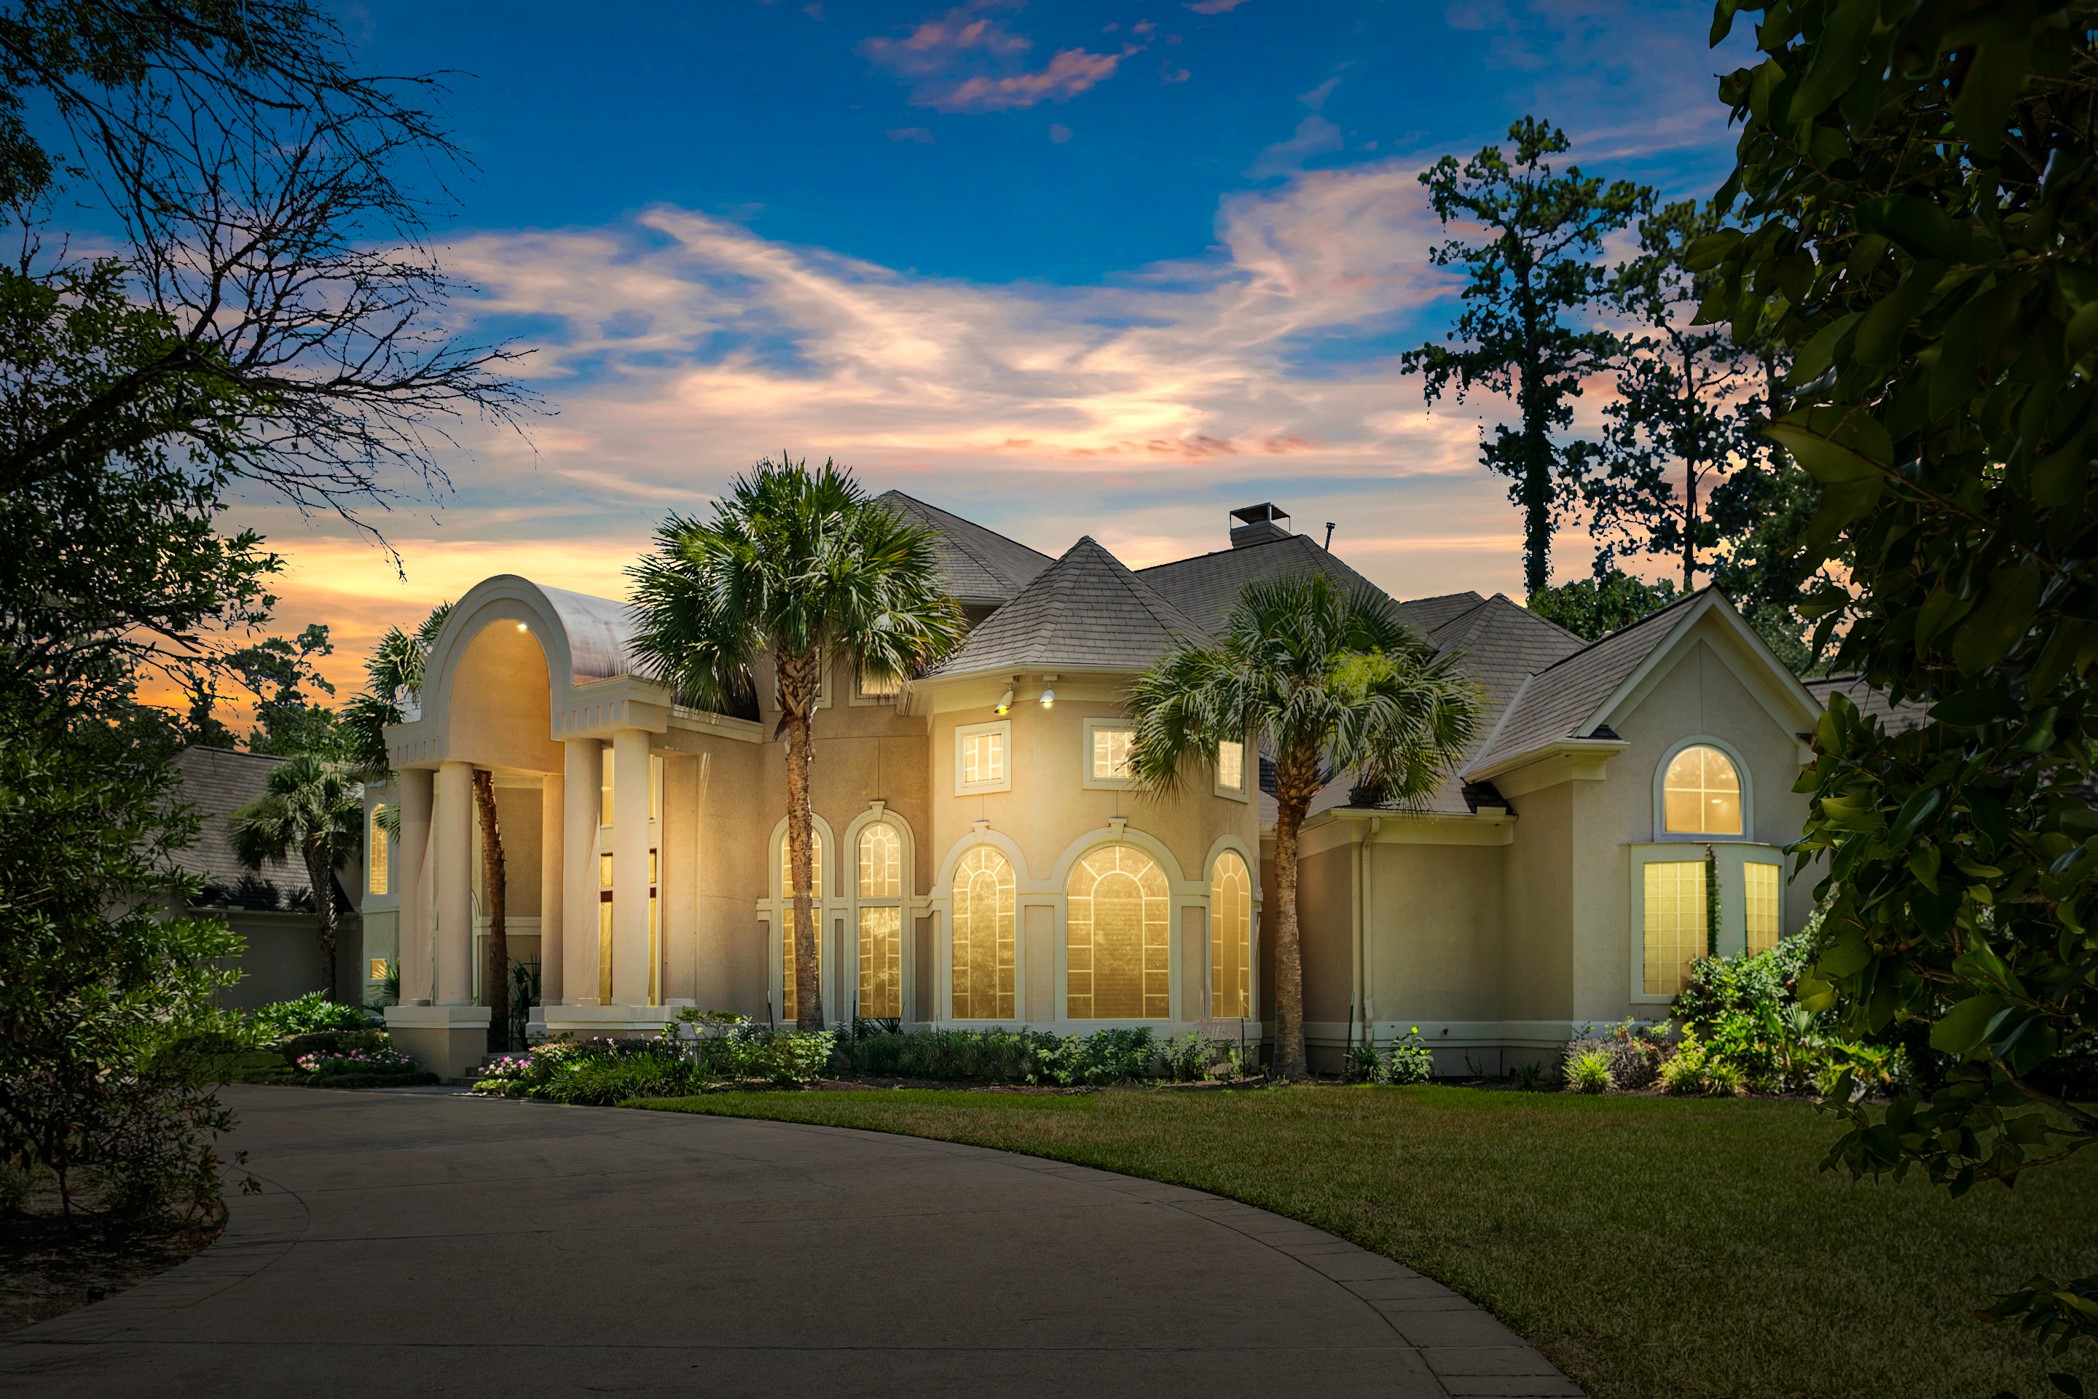 This gorgeous Piney Point showcase home has it all, embraced by tasteful
landscaping, plus lovely palm and specimen trees, with circular drive and porte-cochère, offering ample
parking when hosting events.